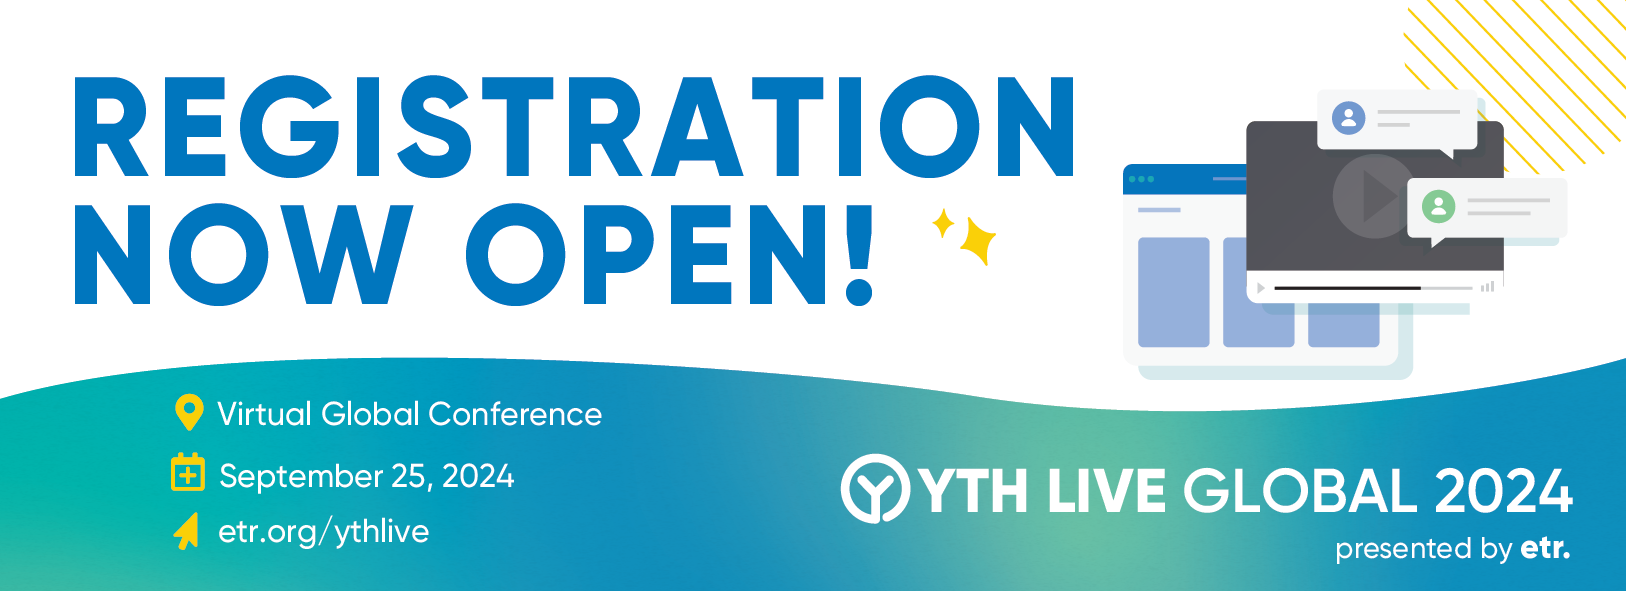 This is a white banner with a blue and green border at the bottom. On the left side of the graphic is the YTH Live Global logo. In the center of the graphic it reads, "Registration Now Open!" On the right side of the graphic is an illustration of a web browser with text bubbles. On top of the green and blue border at the bottom it reads, "September 25, 2024, etr.org/ythlive, presented by ETR."